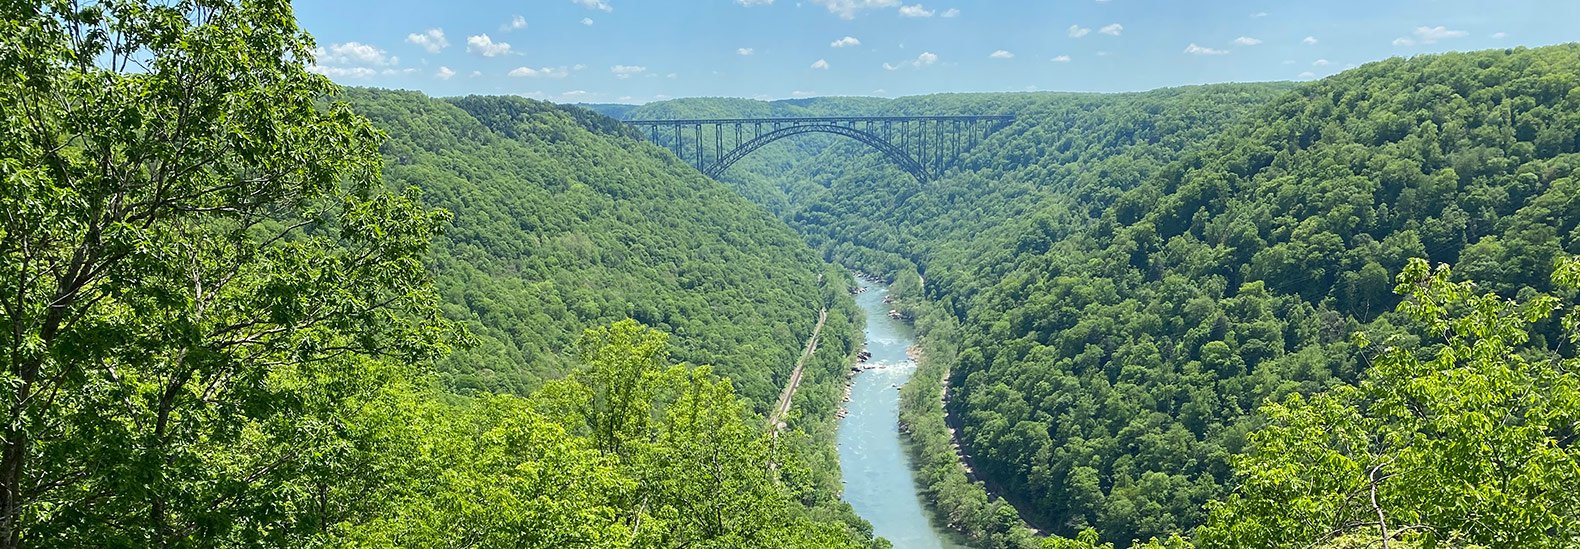 Adventuring in New River Gorge, the newest US national park